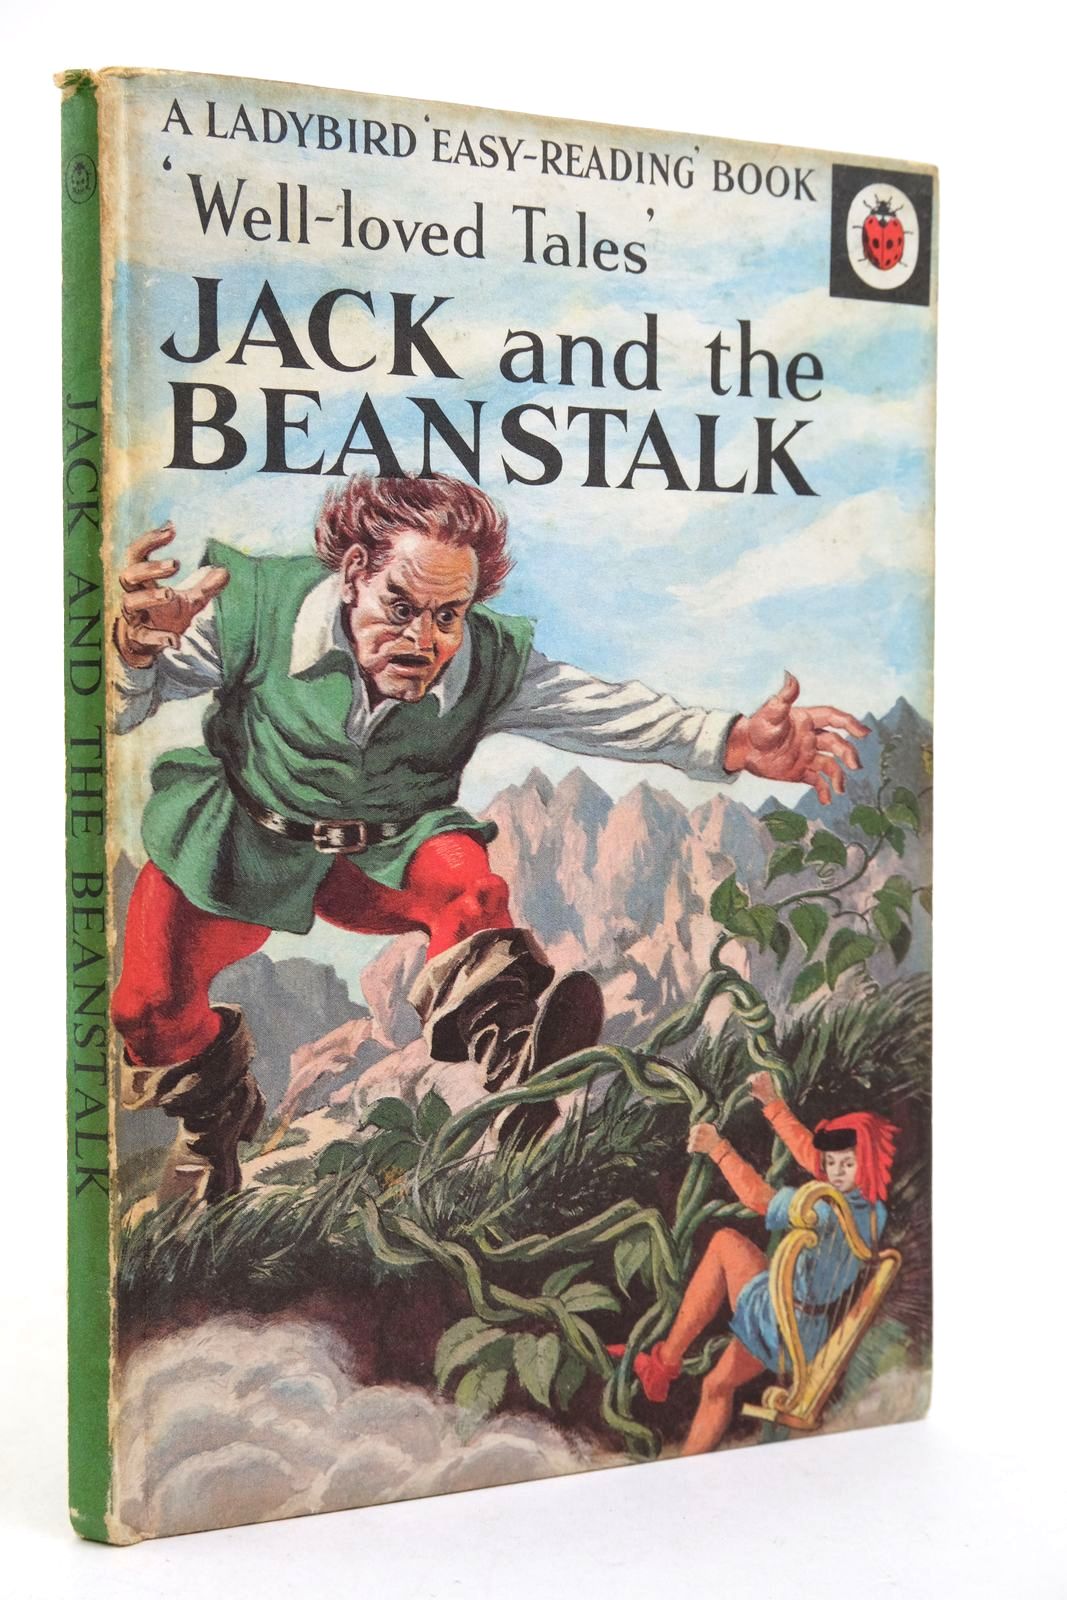 Photo of JACK AND THE BEANSTALK written by Southgate, Vera illustrated by Winter, Eric published by Wills & Hepworth Ltd. (STOCK CODE: 2140245)  for sale by Stella & Rose's Books